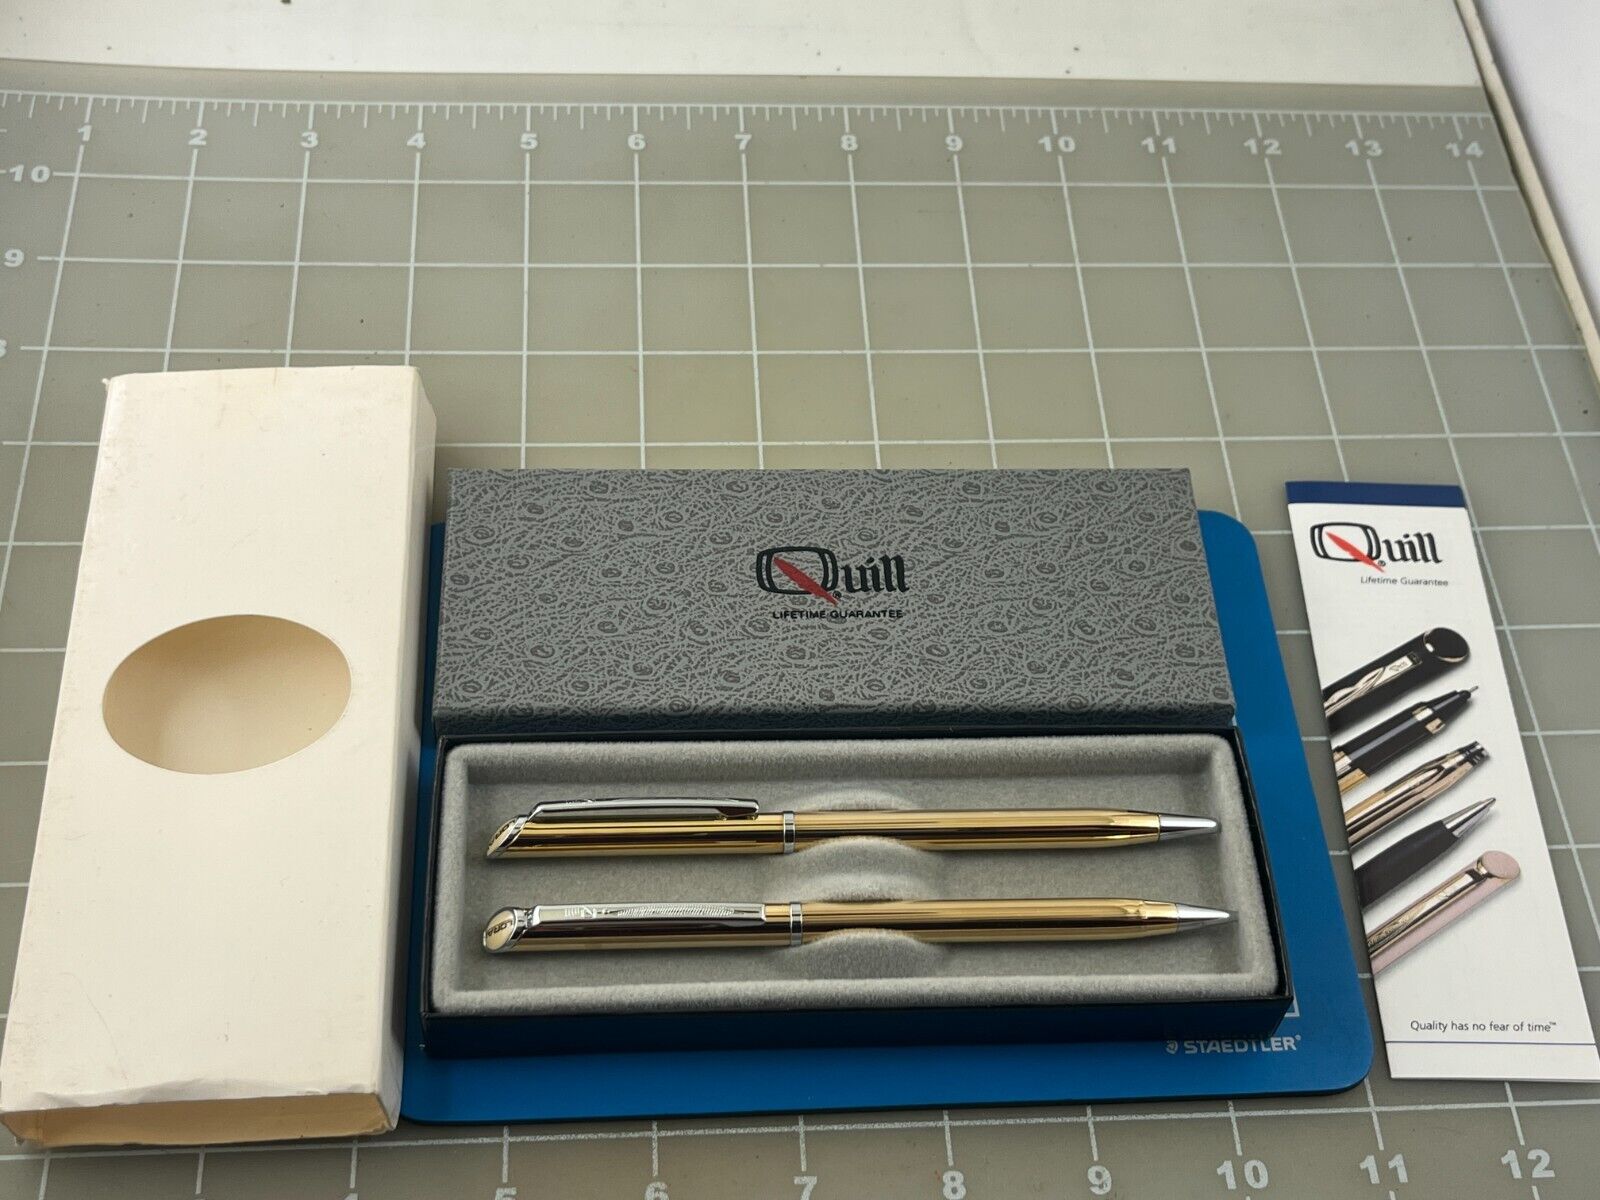 Judd\'s NEW Old Stock Quill Ballpoint Pen & Pencil Set in Box